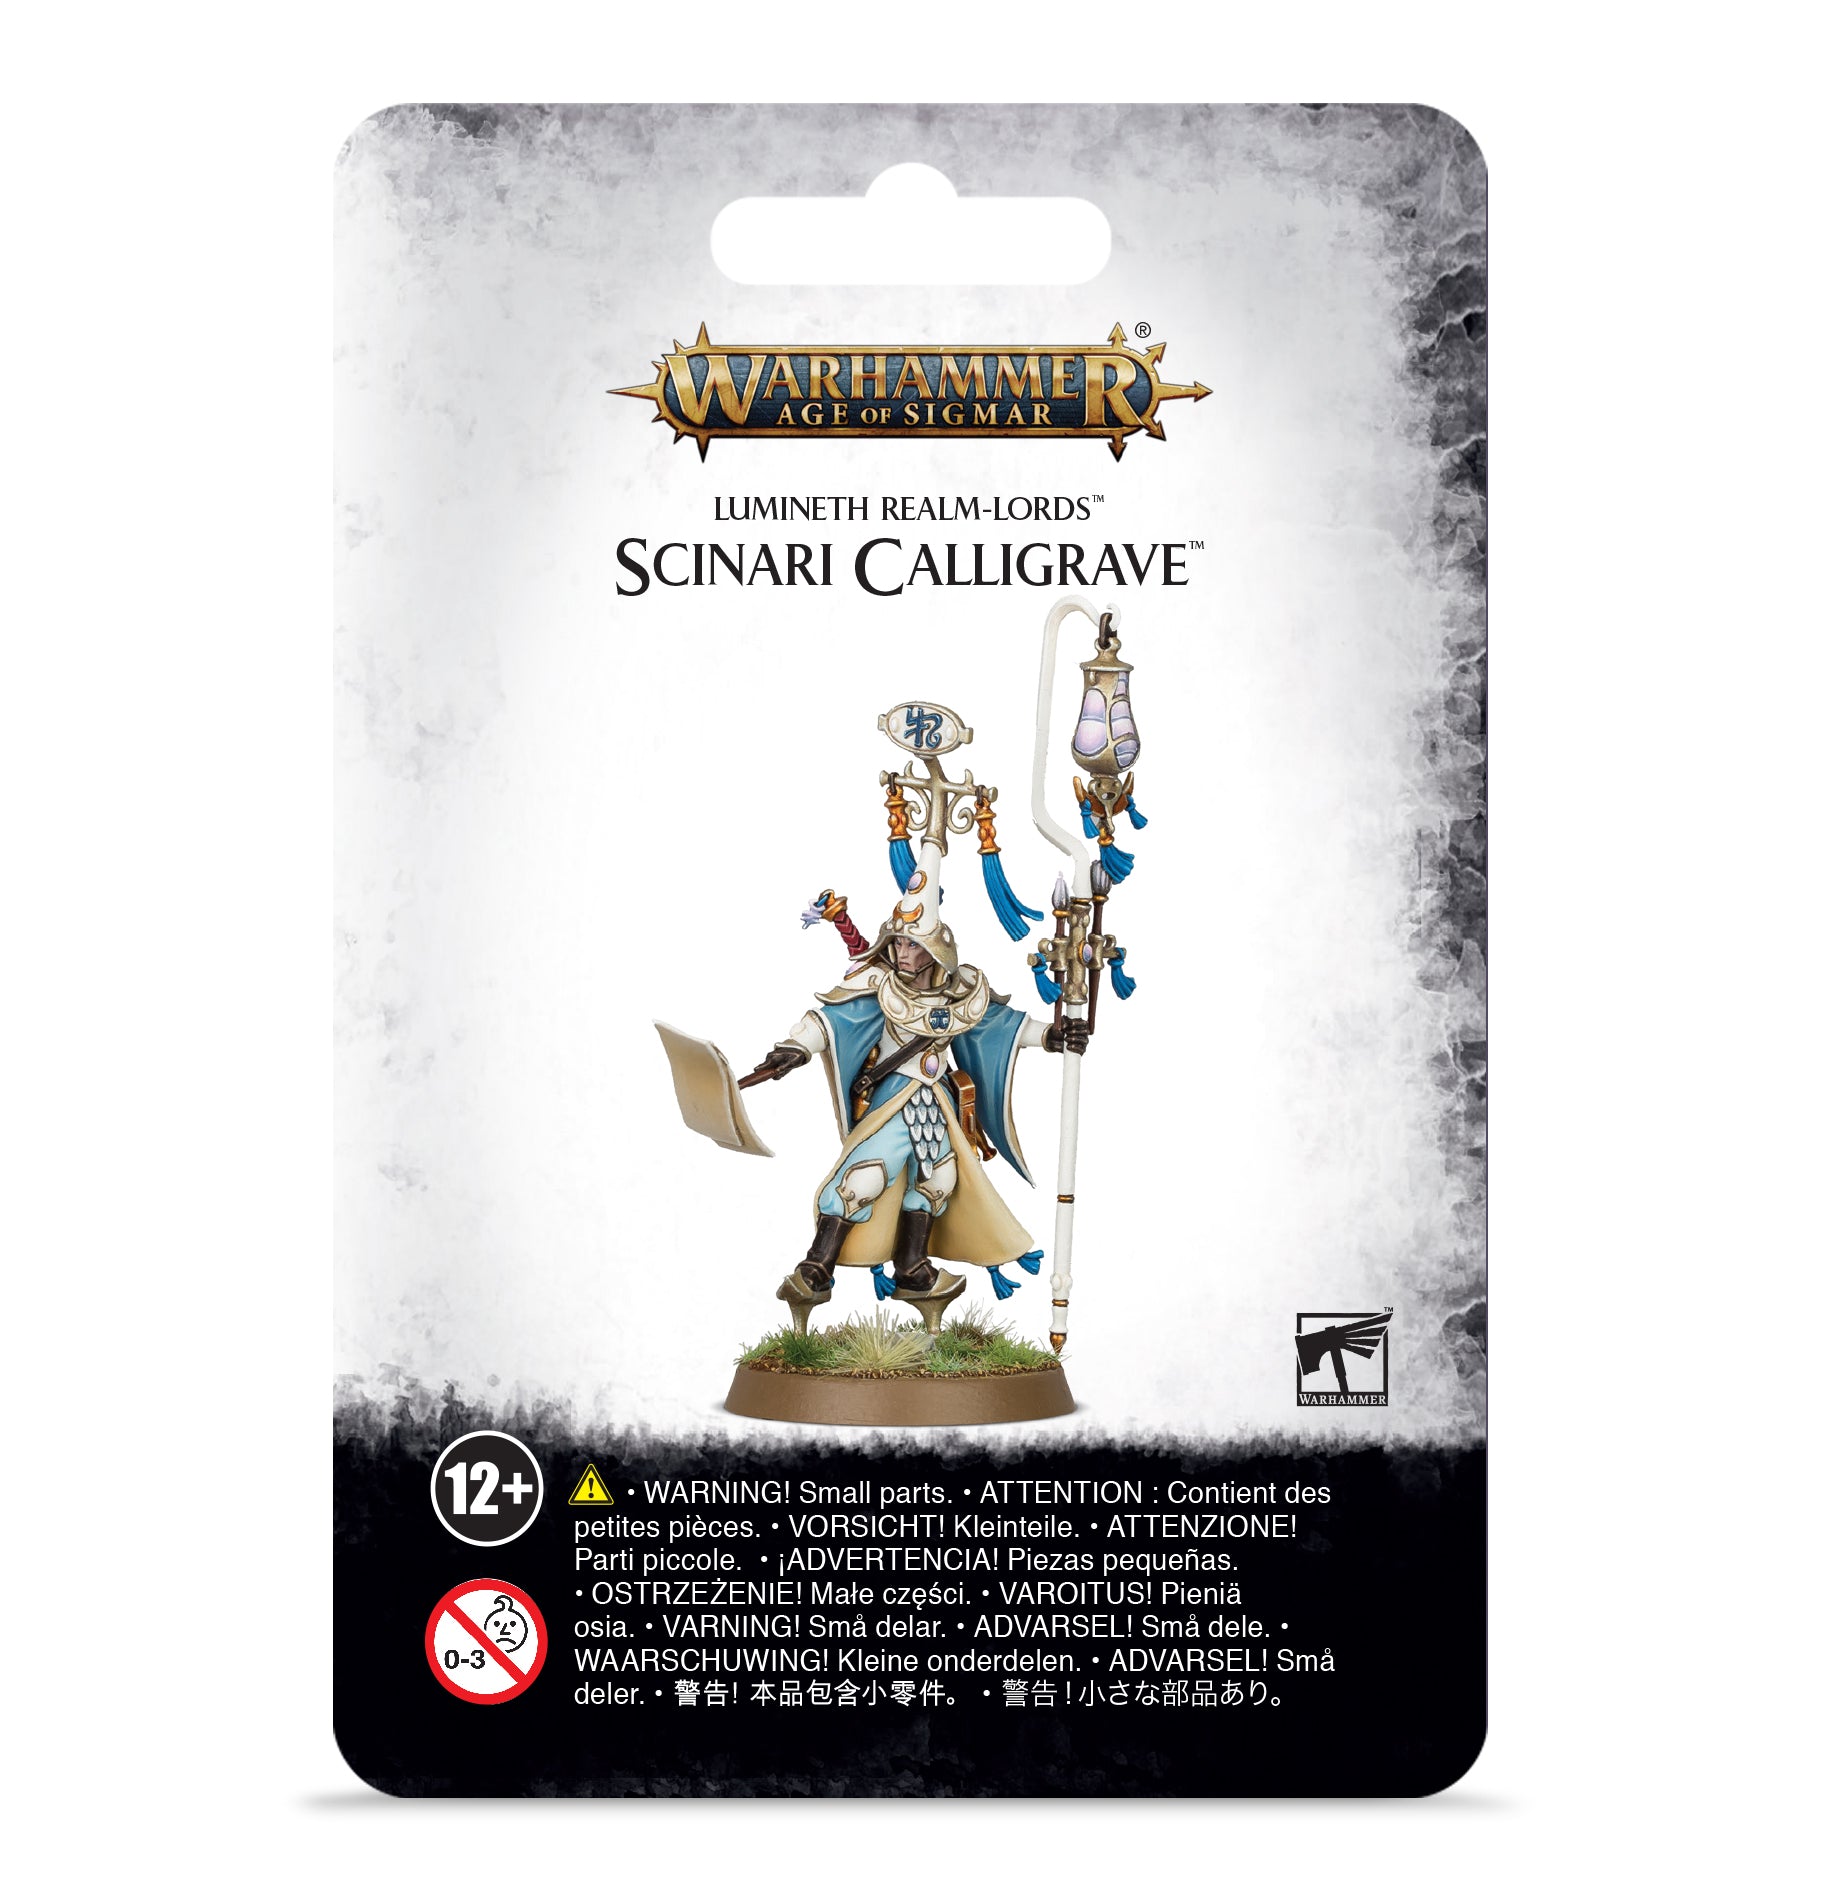 LUMINETH REALM-LORDS SCINARI CALLIGRAVE Realm-Lords Games Workshop    | Red Claw Gaming